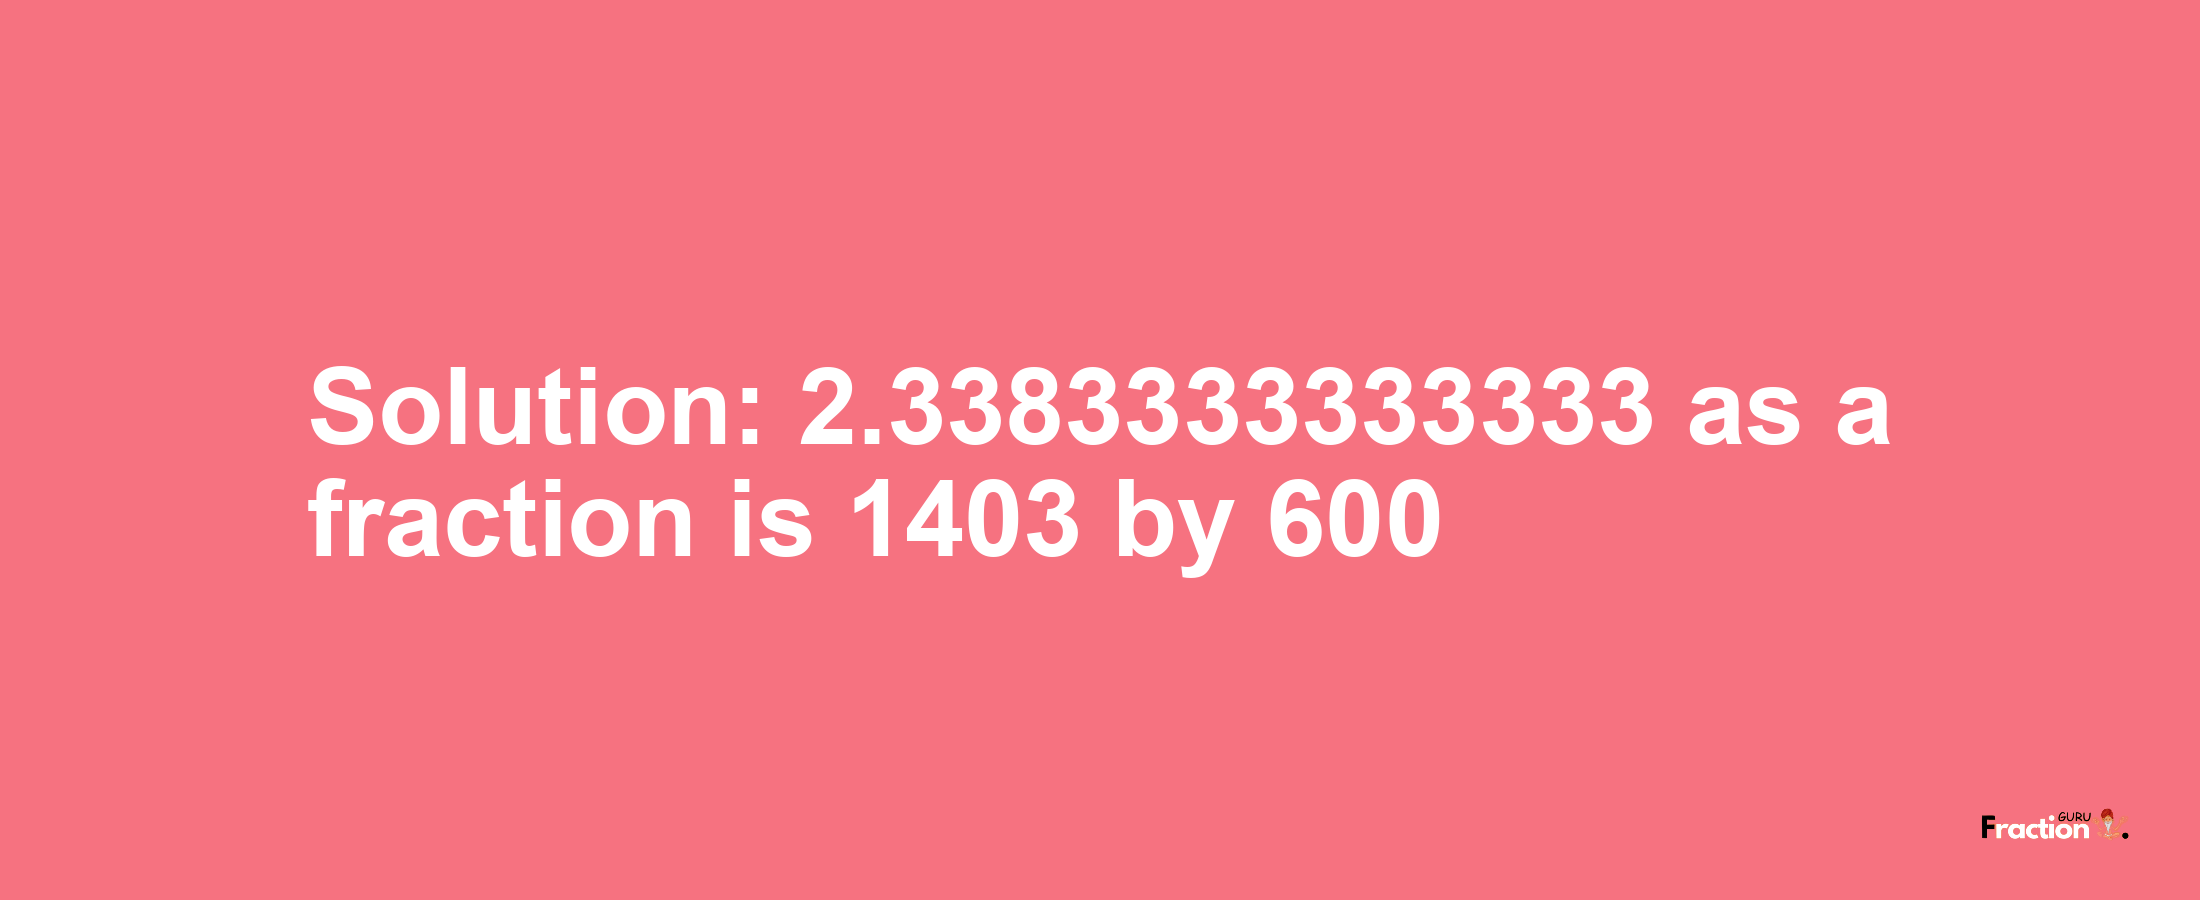 Solution:2.3383333333333 as a fraction is 1403/600